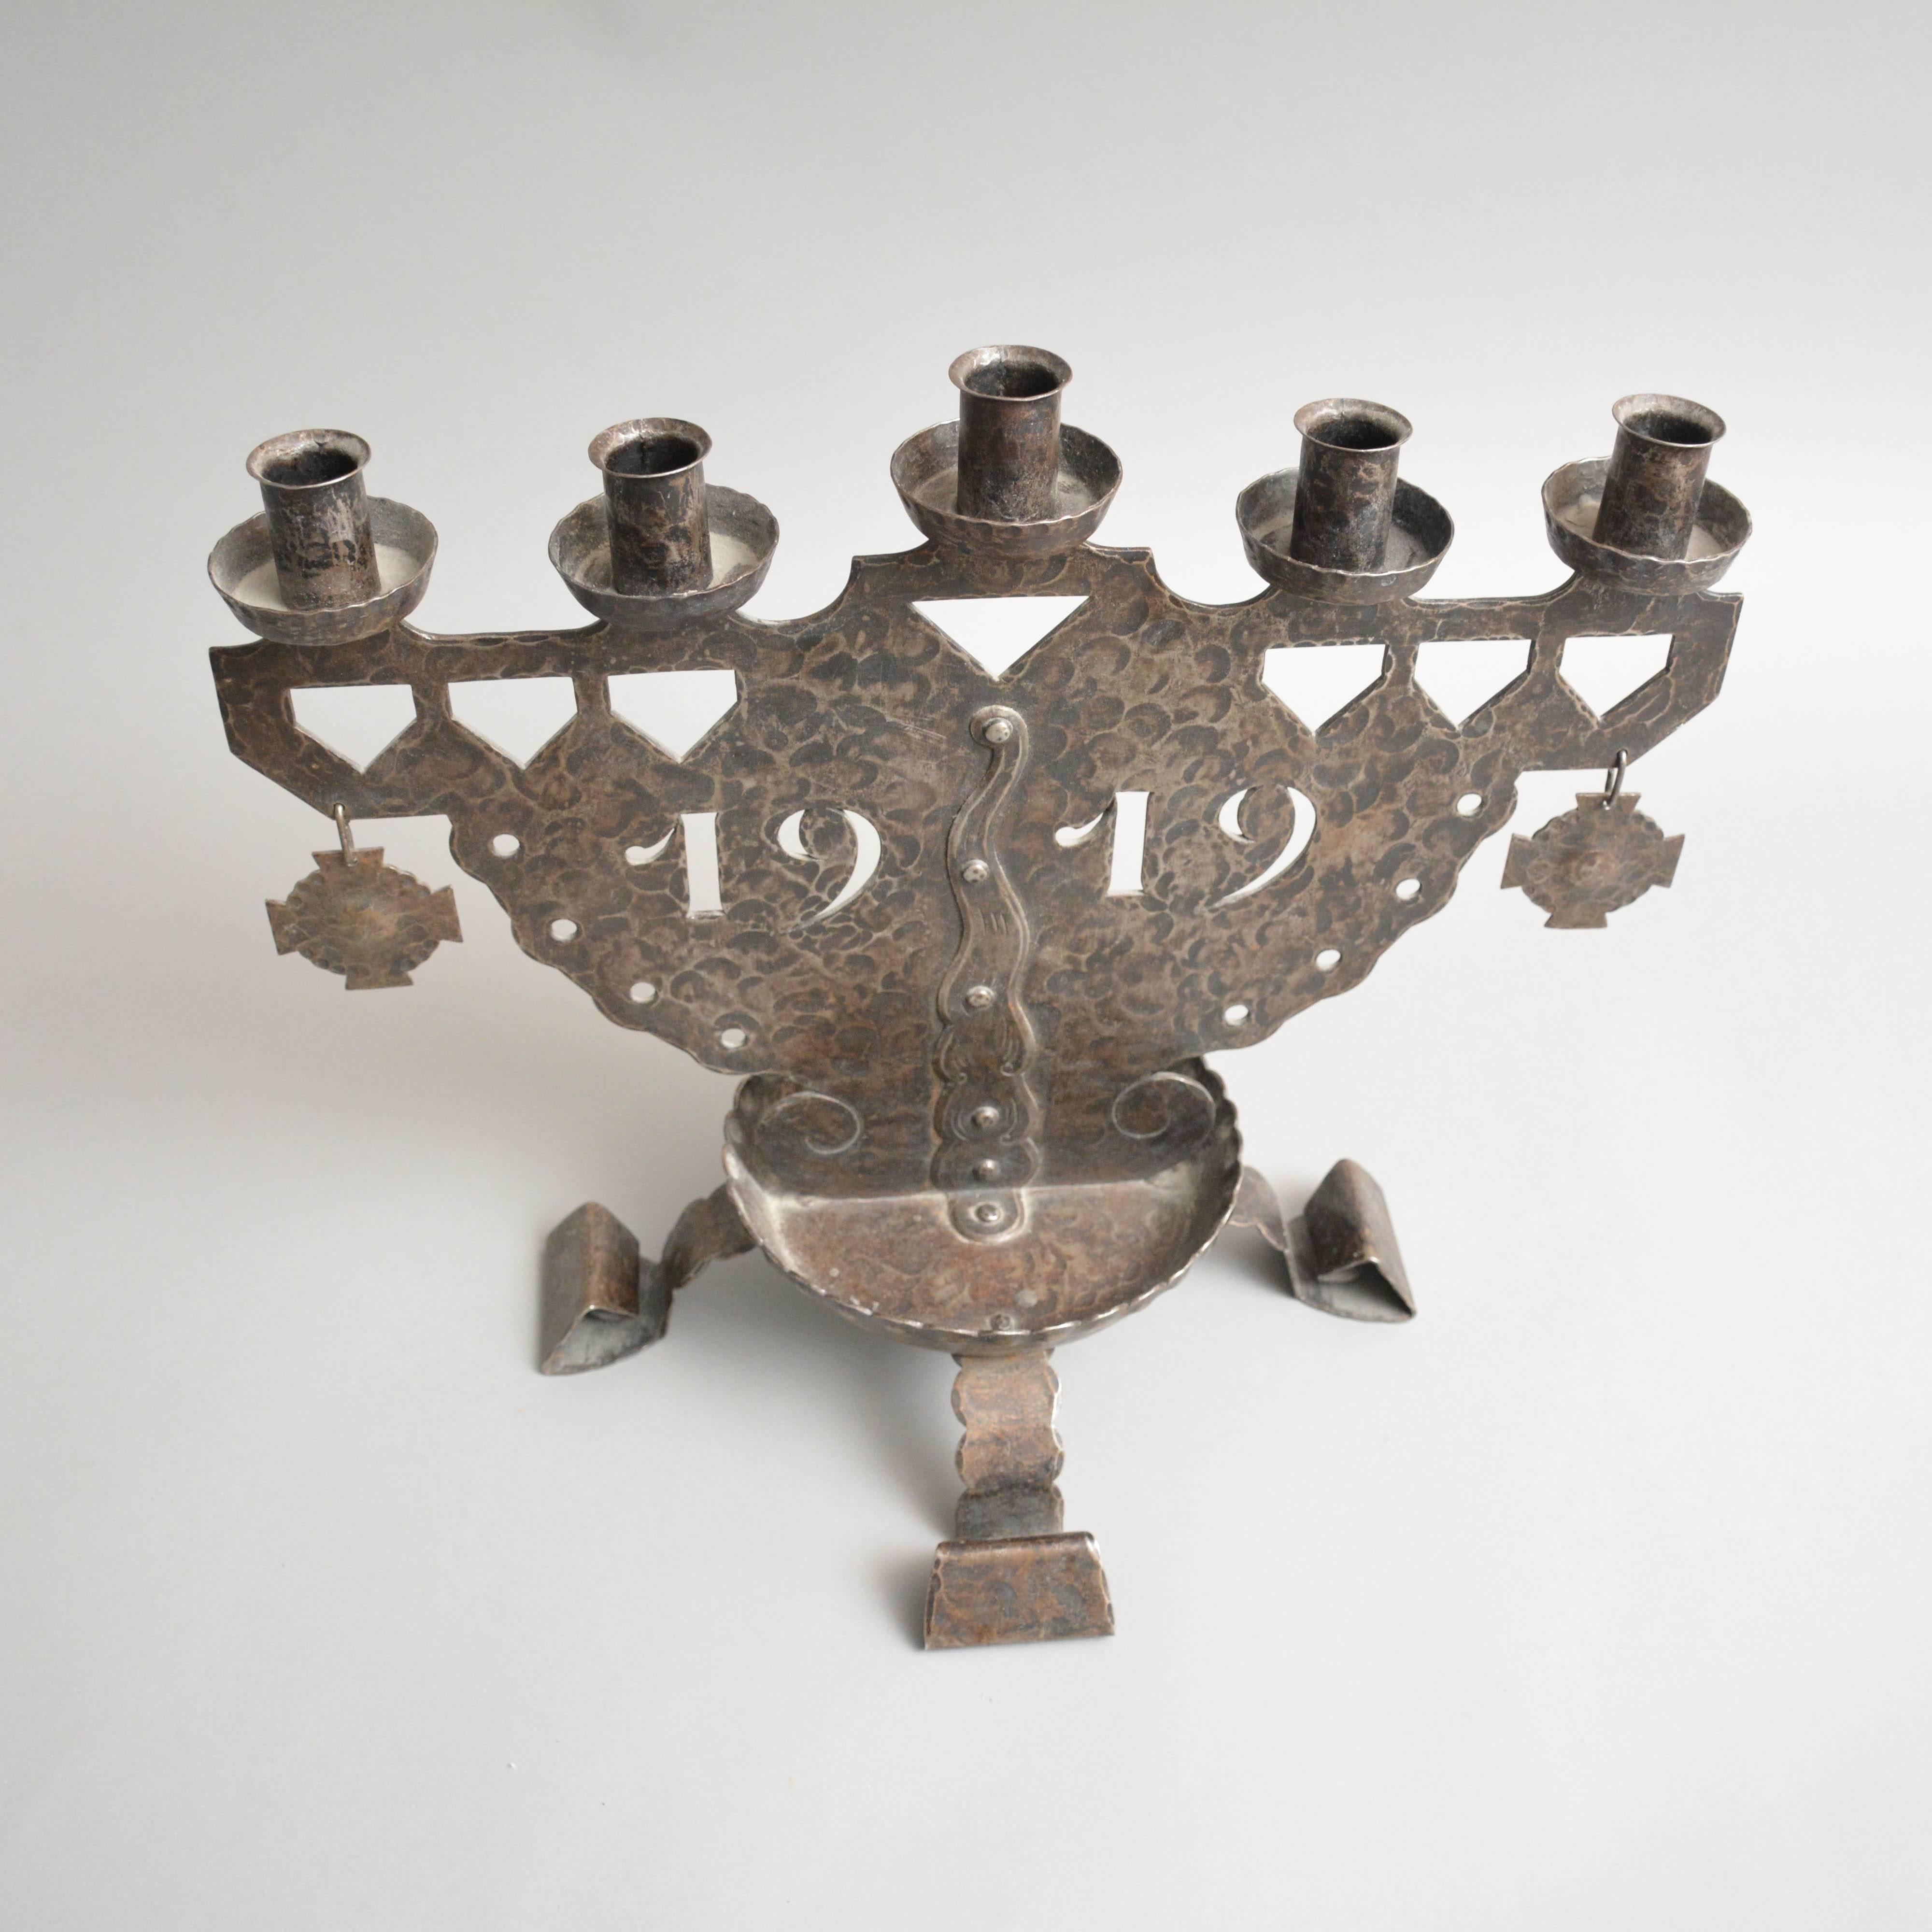 Wrought iron candelabra. National romantic style. Dated 1919.